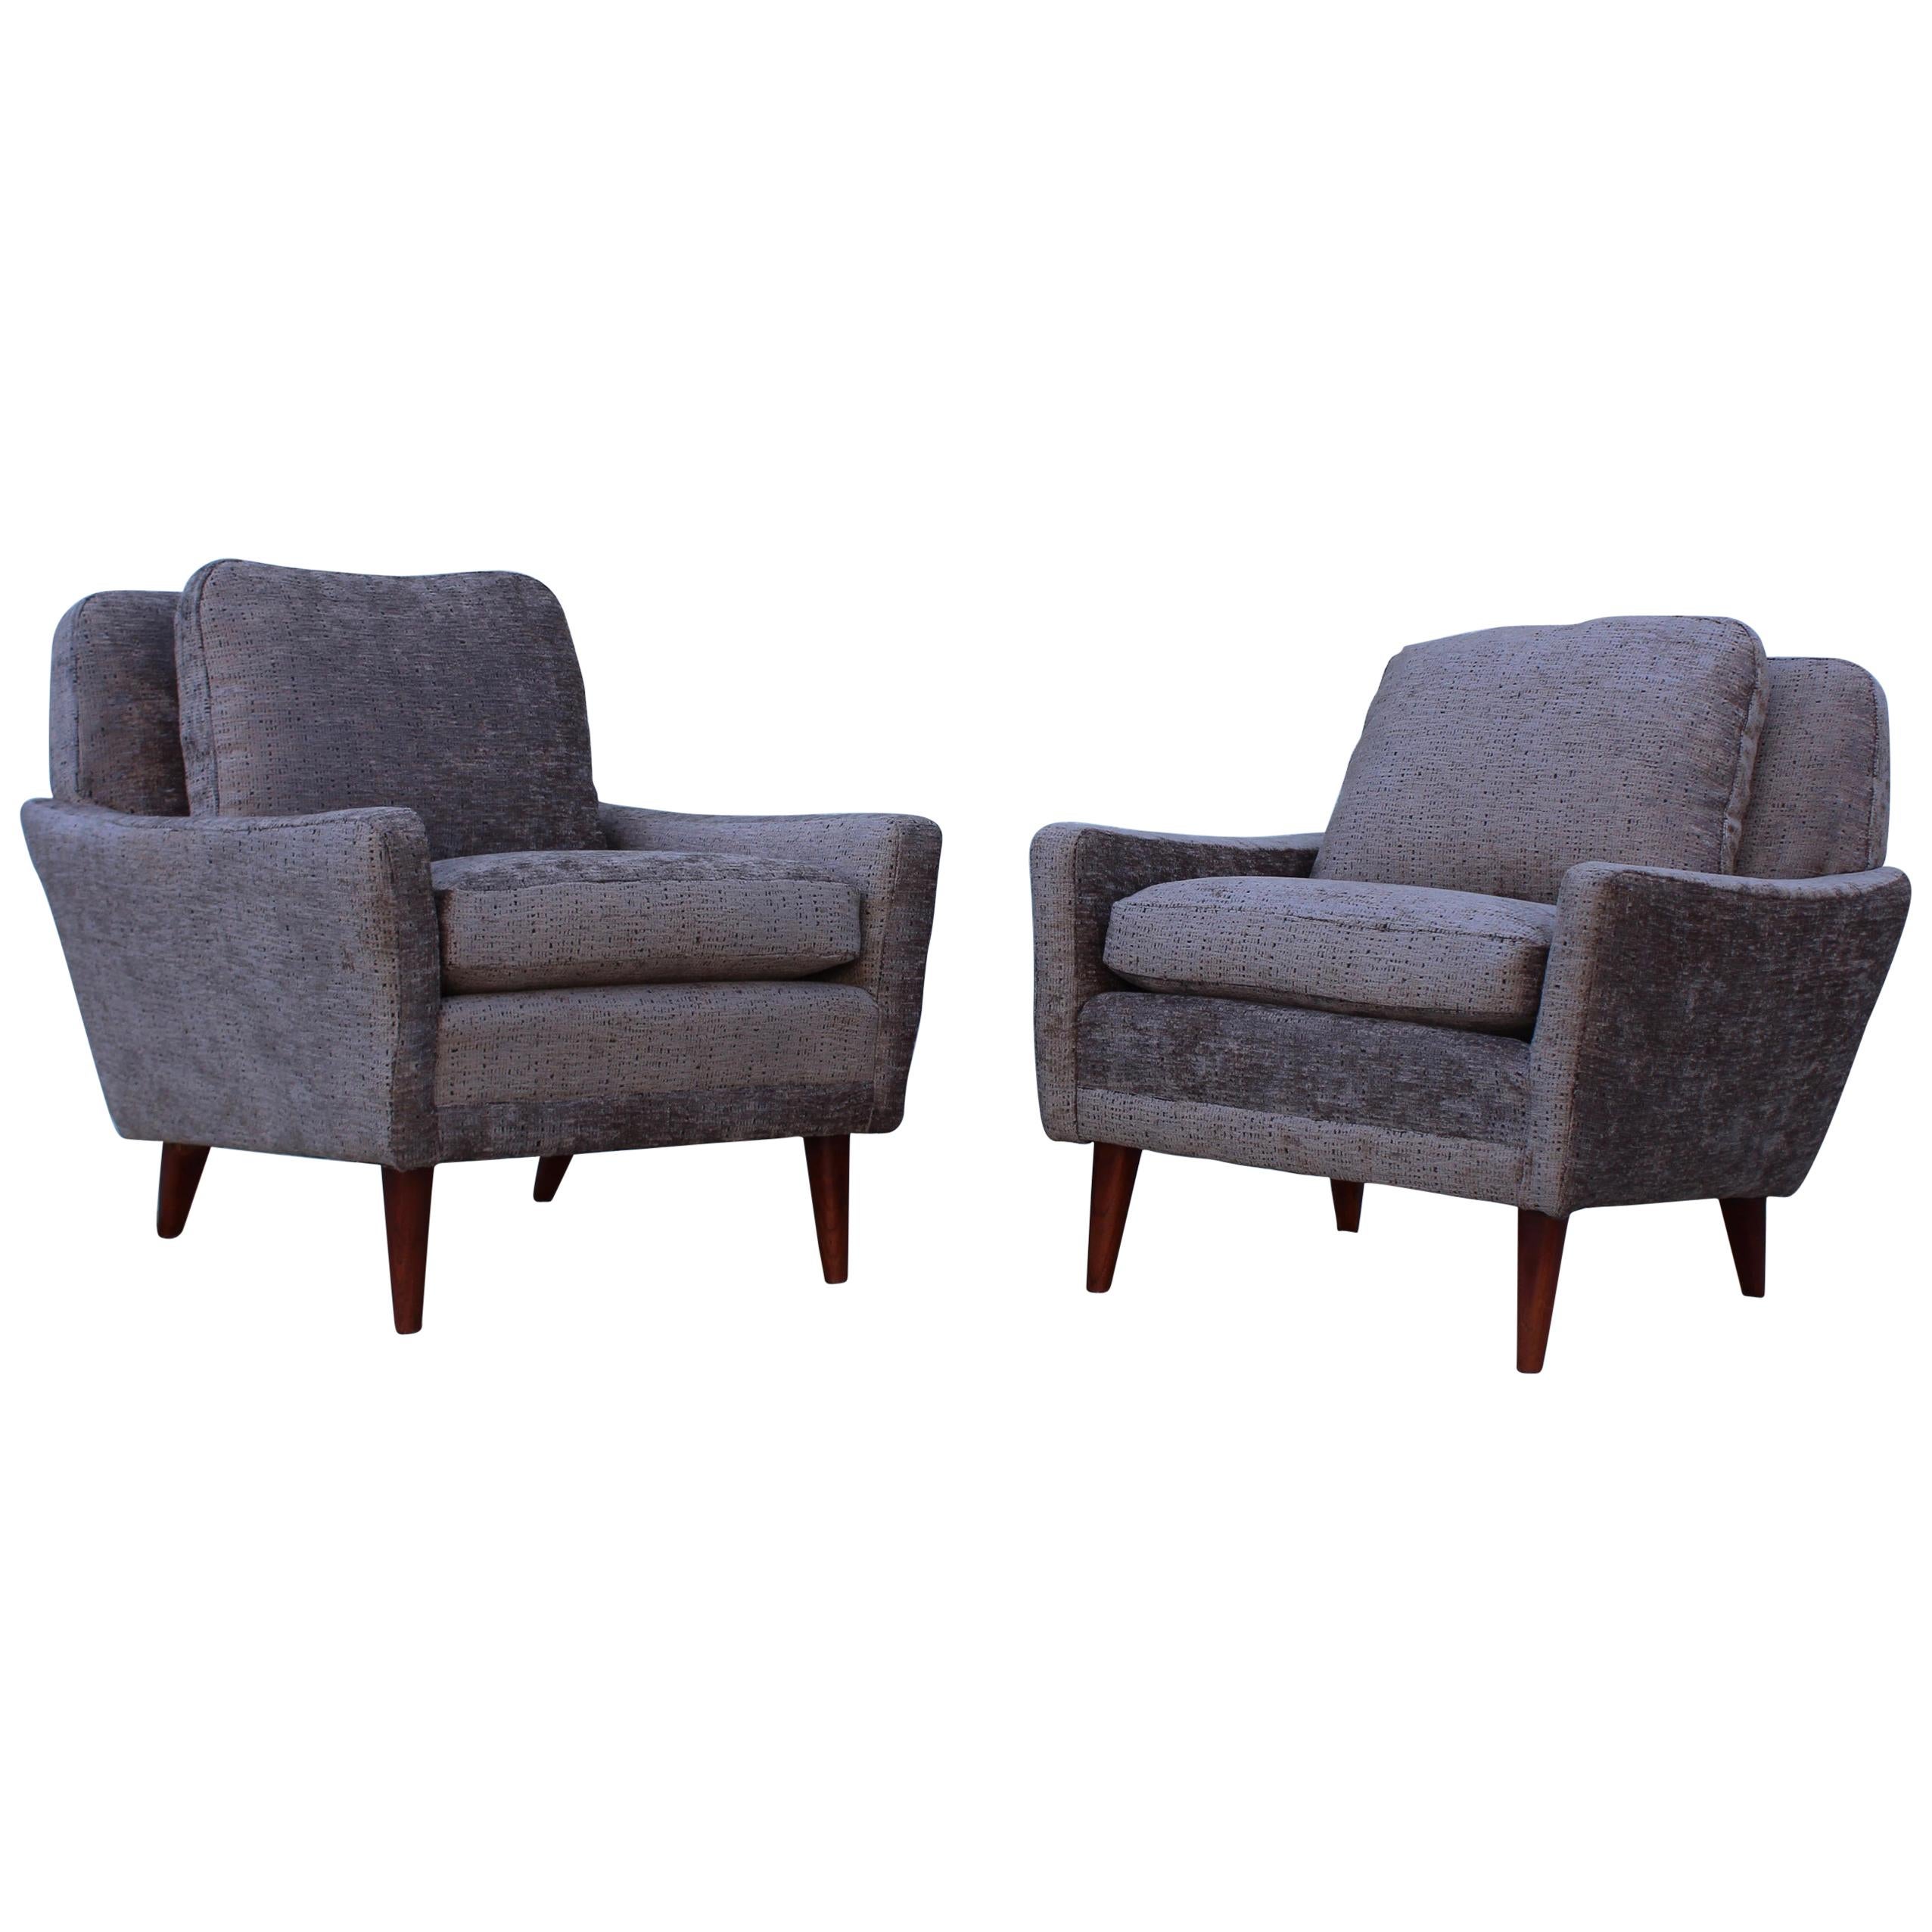 1960s Swedish Lounge Chairs by DUX